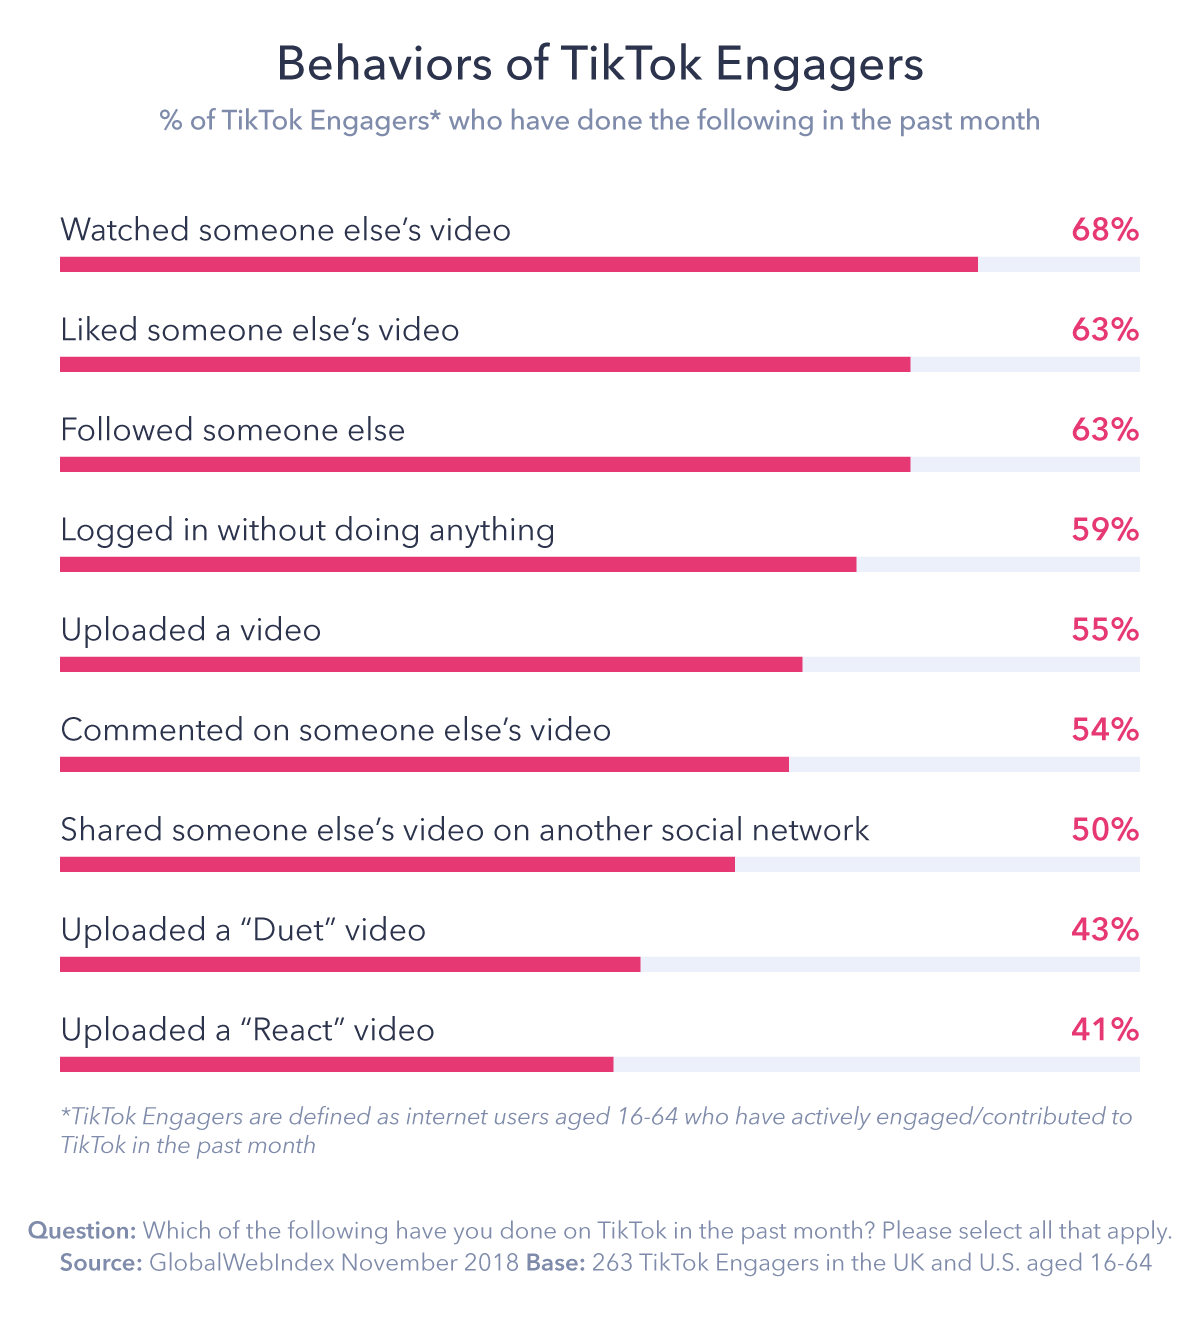 Behaviors of TikTok Engagers in the past month: 68% watched someone else's video; 63% liked someone else's video; 63% followed someone else.